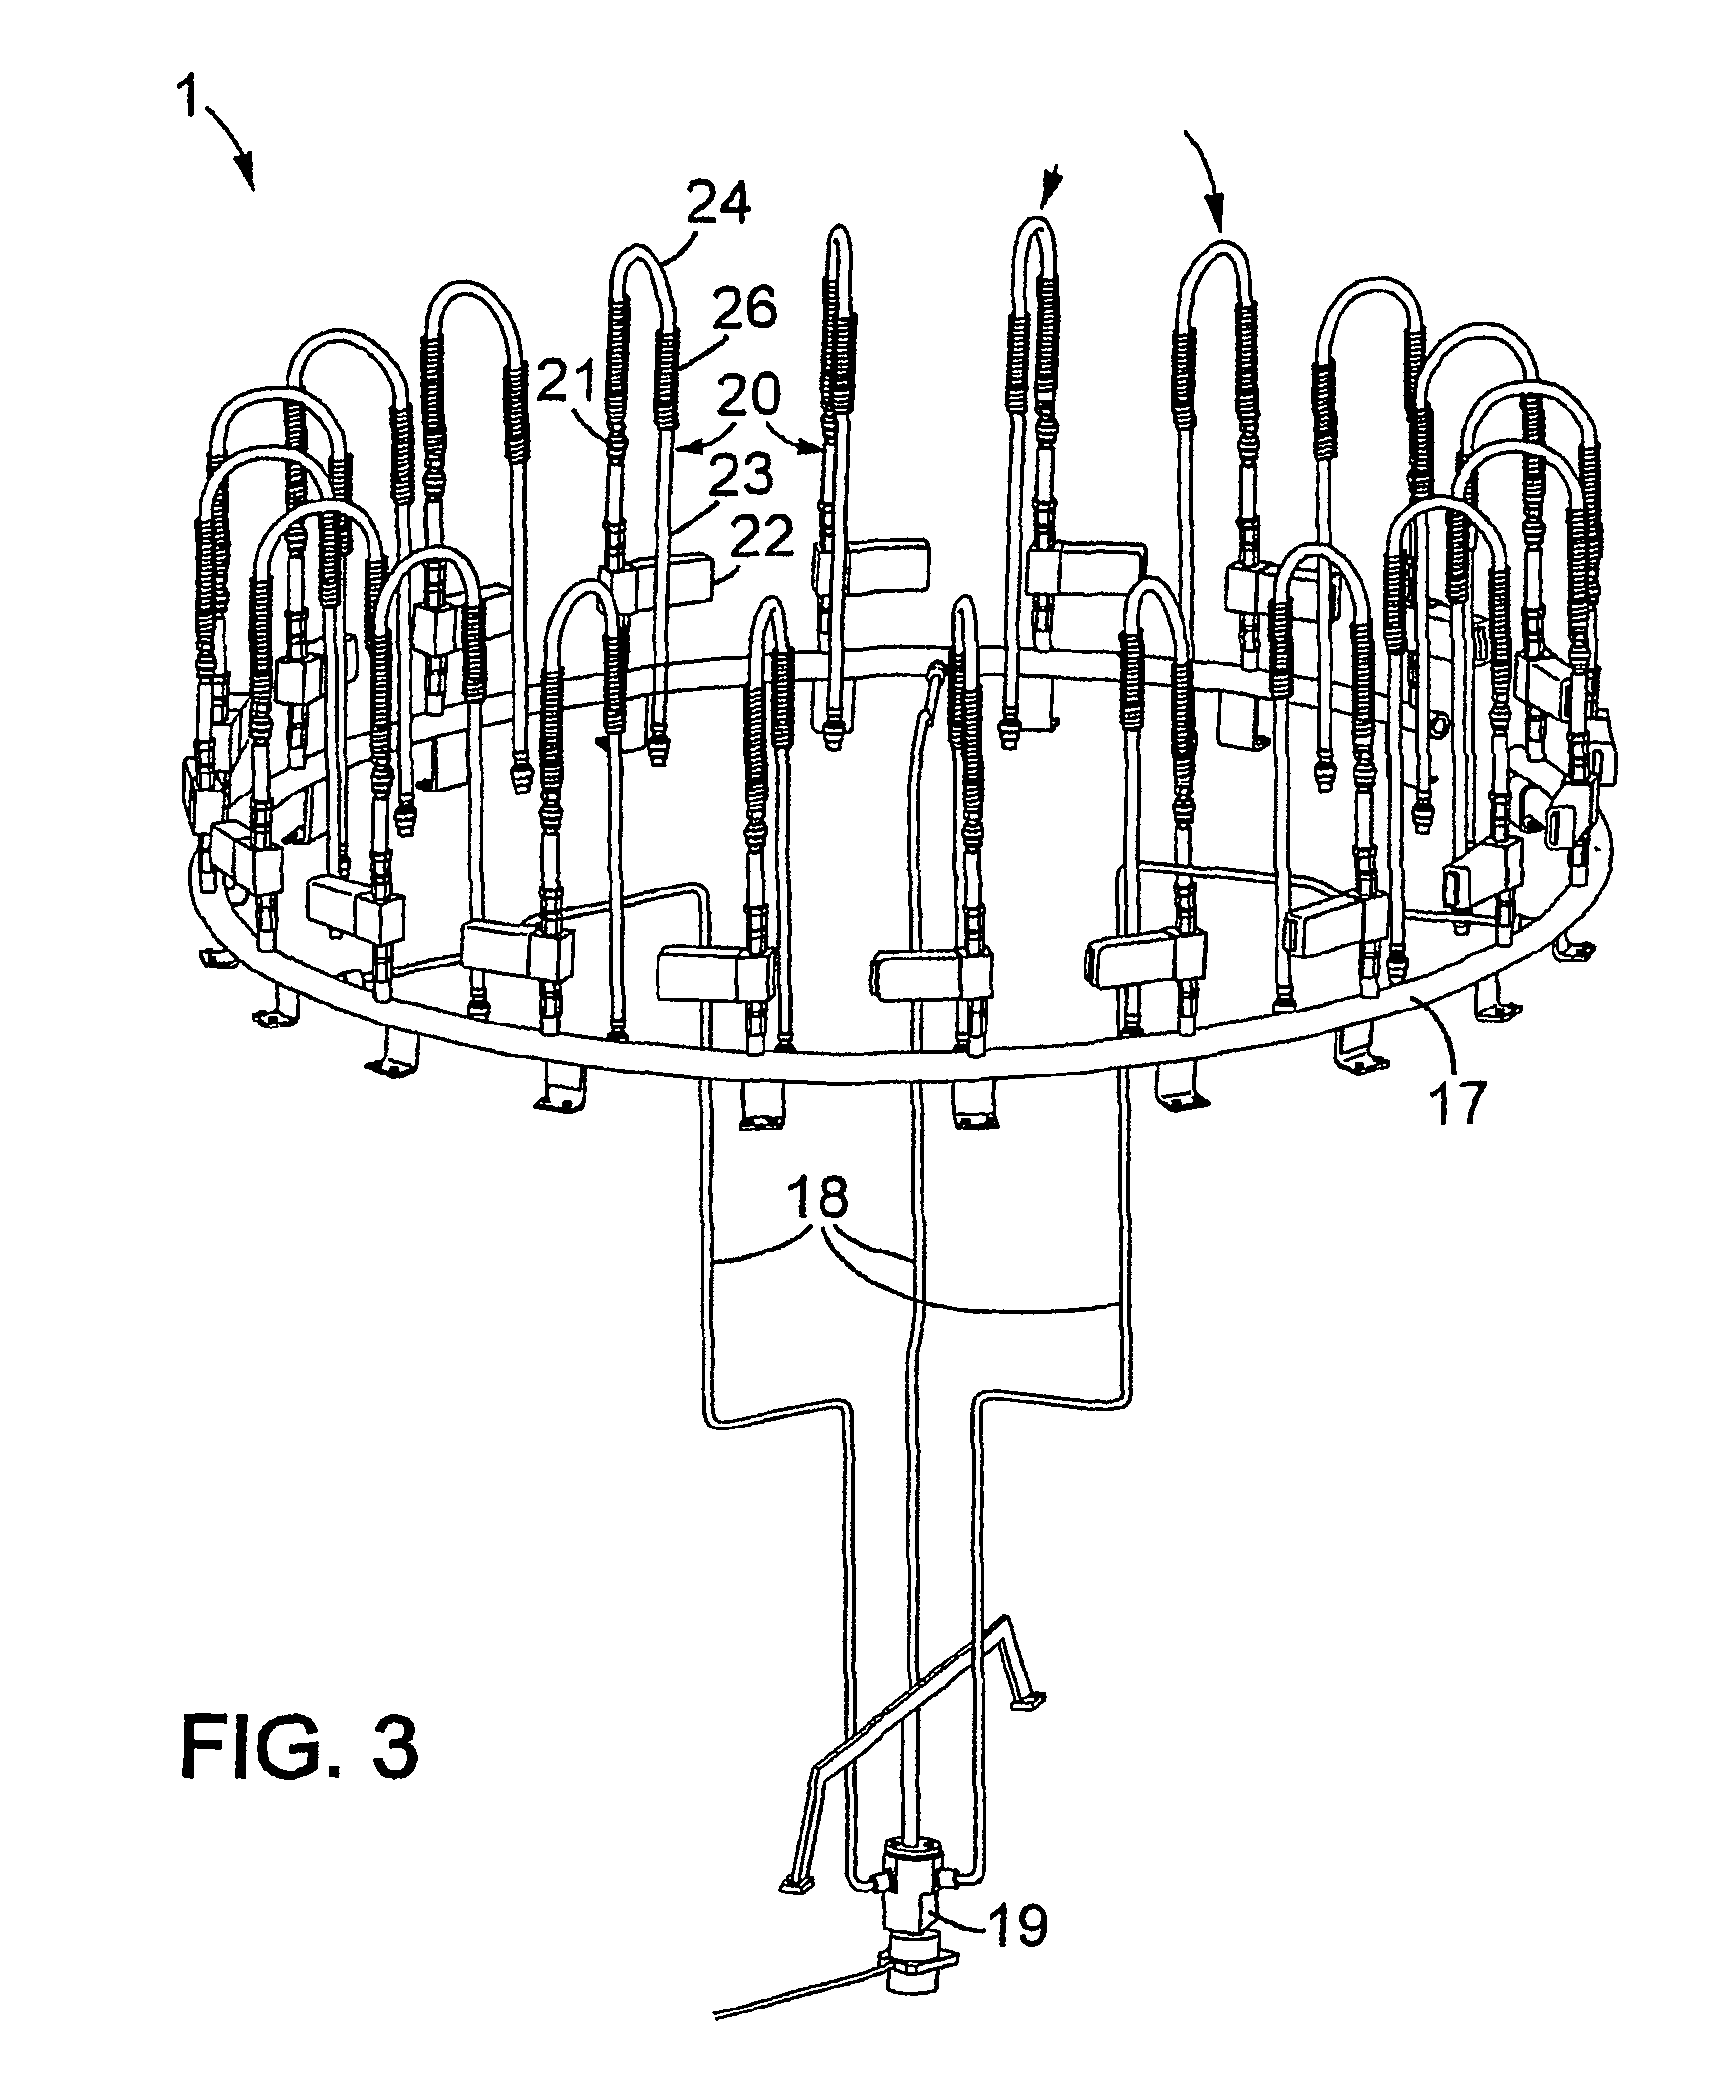 Apparatus for plasma-enhanced chemical vapor deposition (PECVD) of an internal barrier layer inside a container, said apparatus including a gas line isolated by a solenoid valve